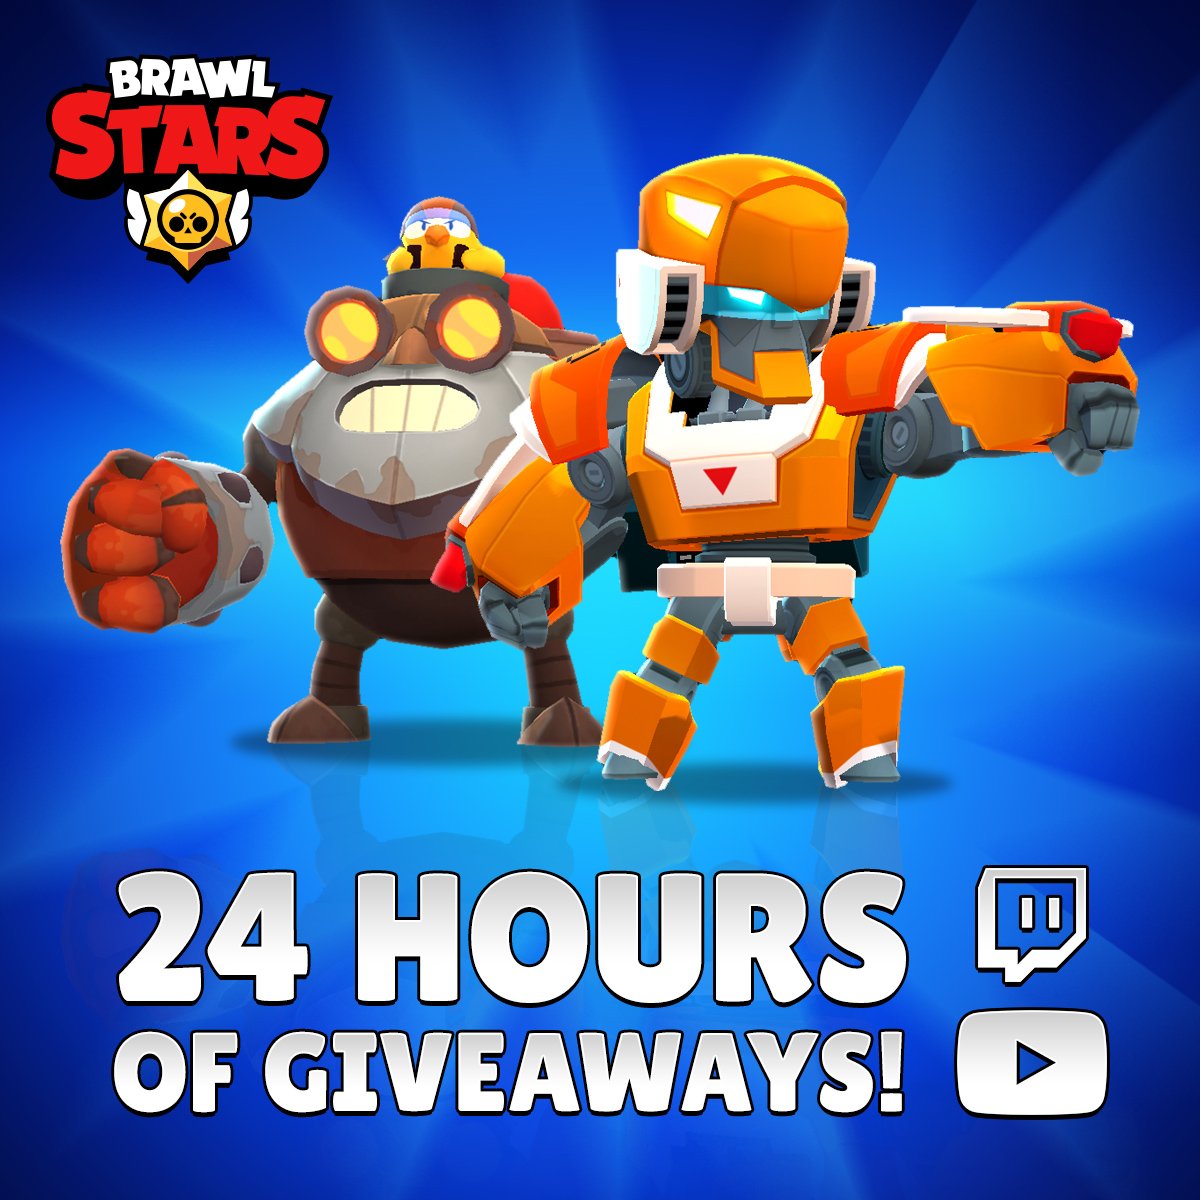 Brawl Stars Sur Twitter Retweet For A Chance To Winbrawlskins But If You Don T Get Lucky Don T Worry This Sunday July 14th More Than 30 Streamers Will Be Hosting Giveaways - serveur privée brawls stars